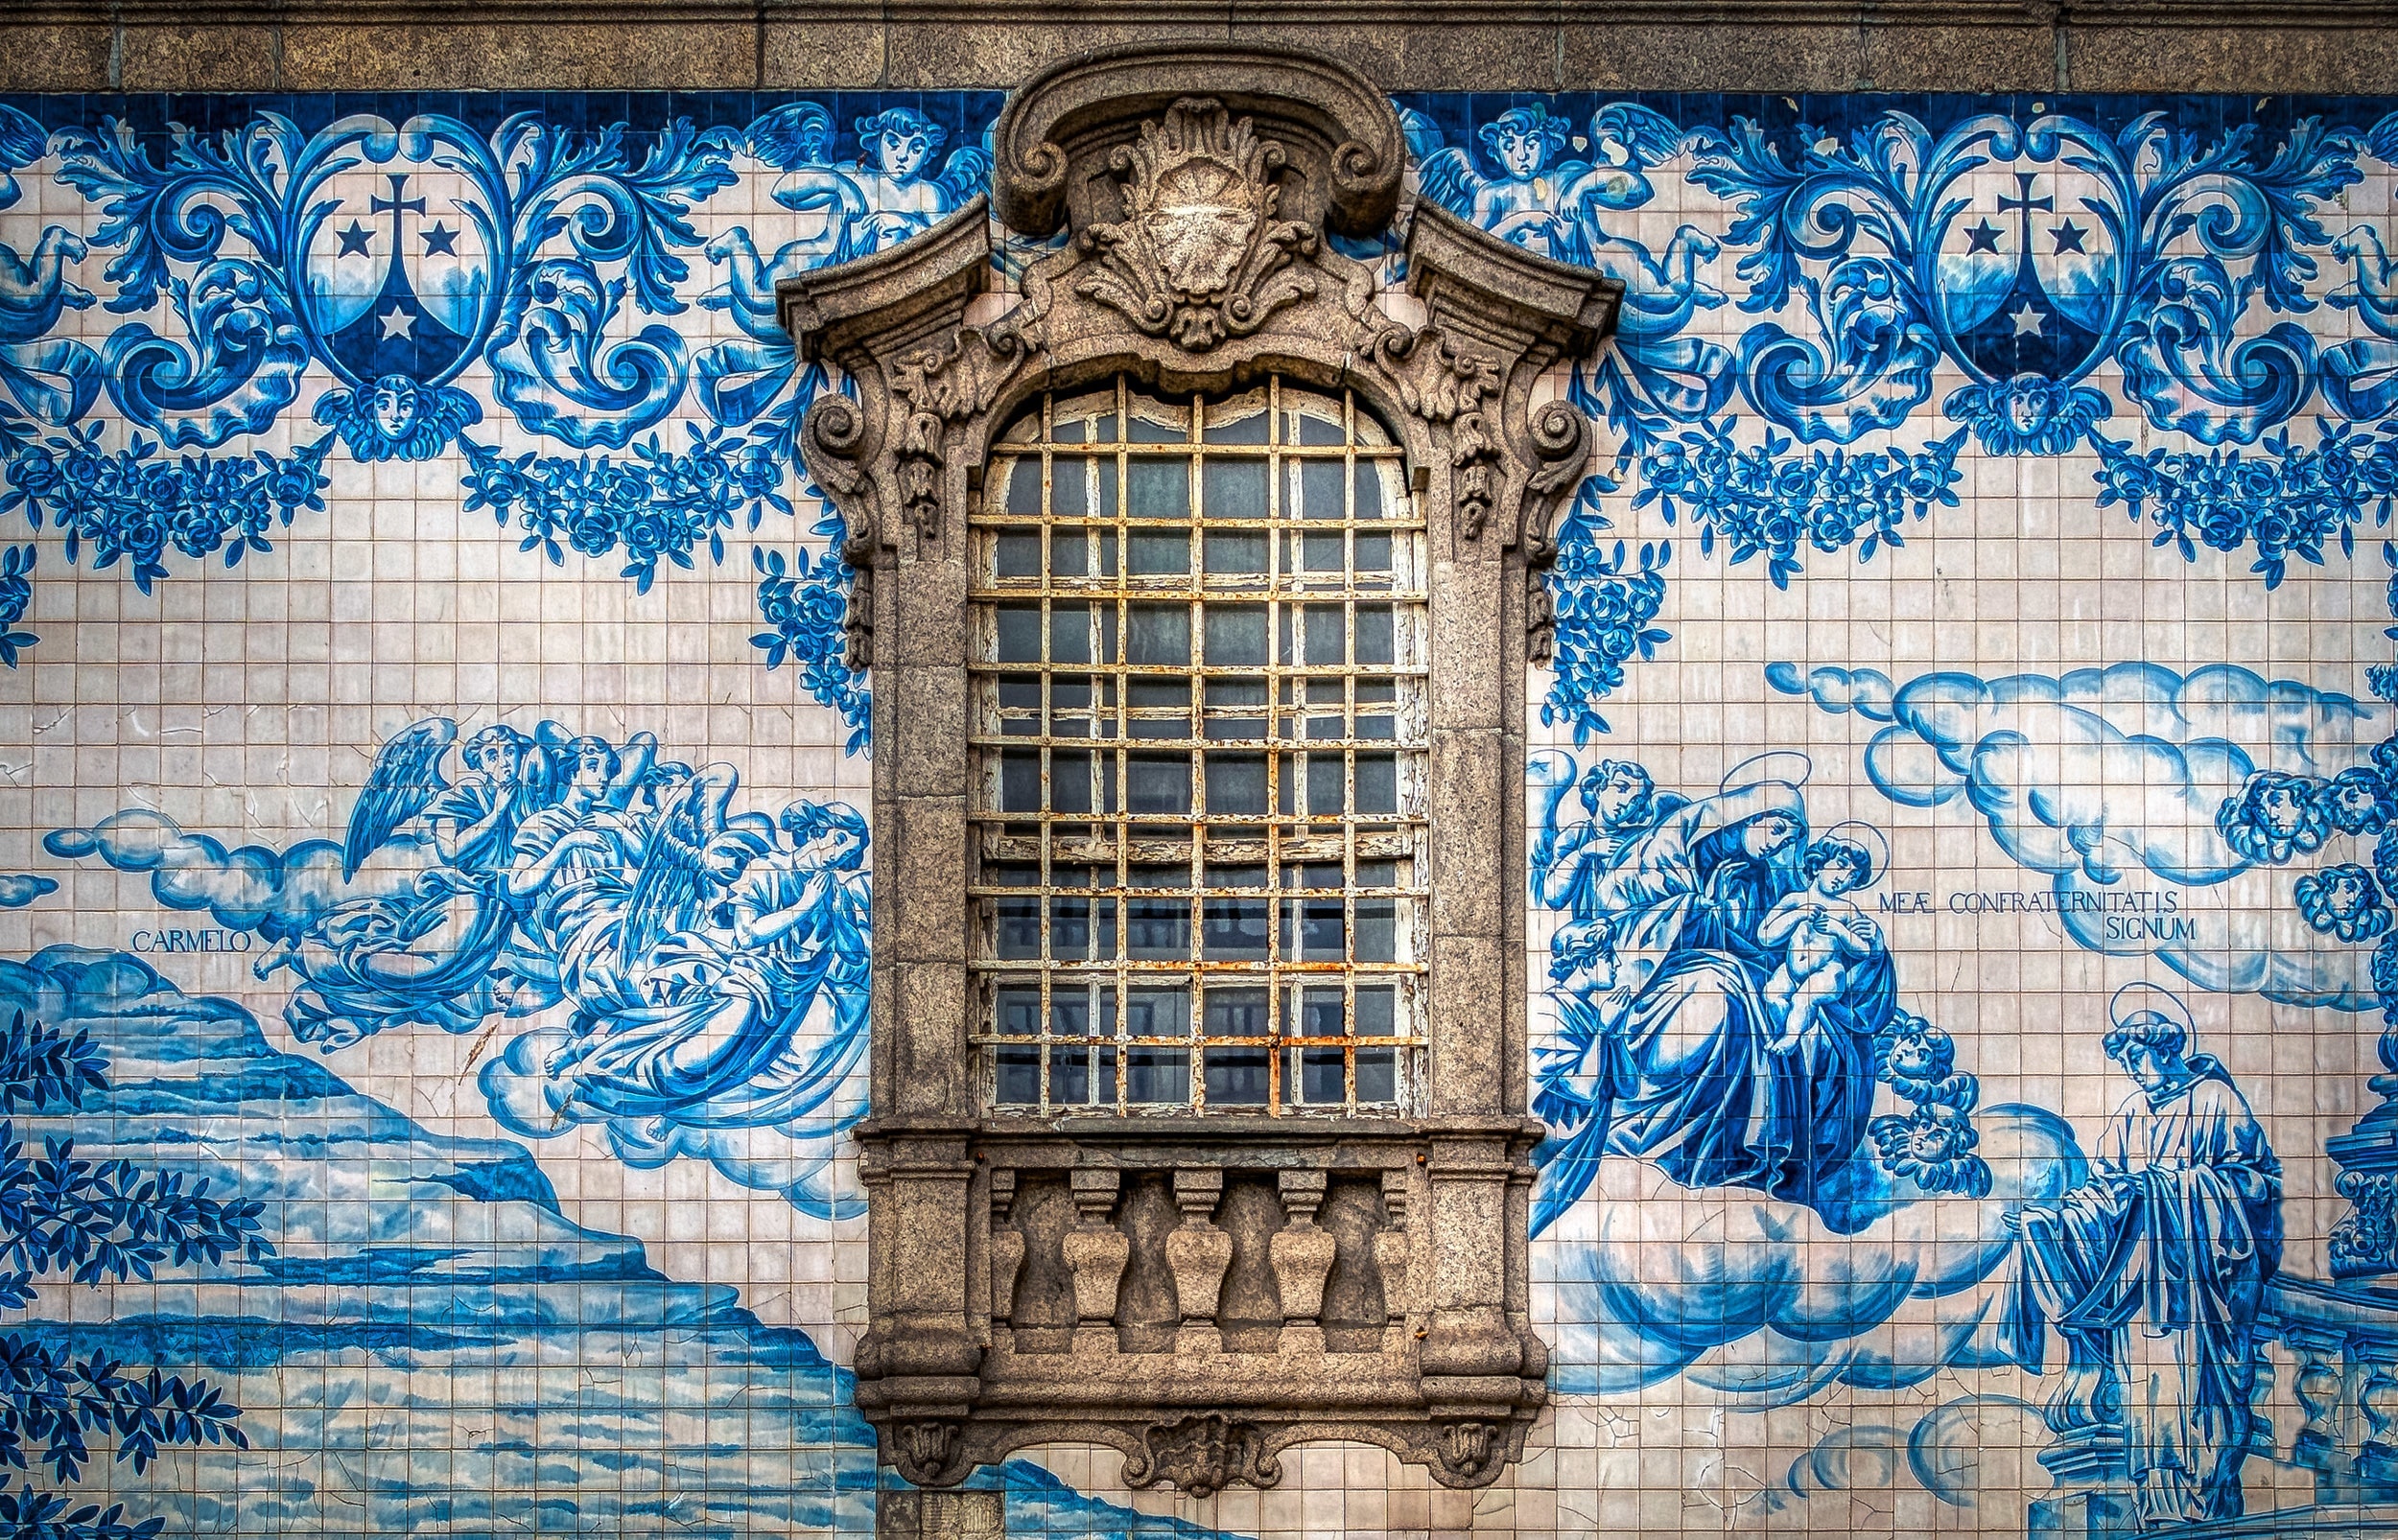 "Azulejo" is a form of Spanish and Portuguese painted tin-glazed ceramic tilework. Azulejos are found on churches, palaces, ordinary houses, schools, and nowadays, restaurants, bars and even railways or subway stations. They were not only used as an ornamental art form but also had a specific functional capacity like temperature control in homes. I photographed this beautiful artwork outside of the "Igreja do Carmo" church in Porto, Portugal.